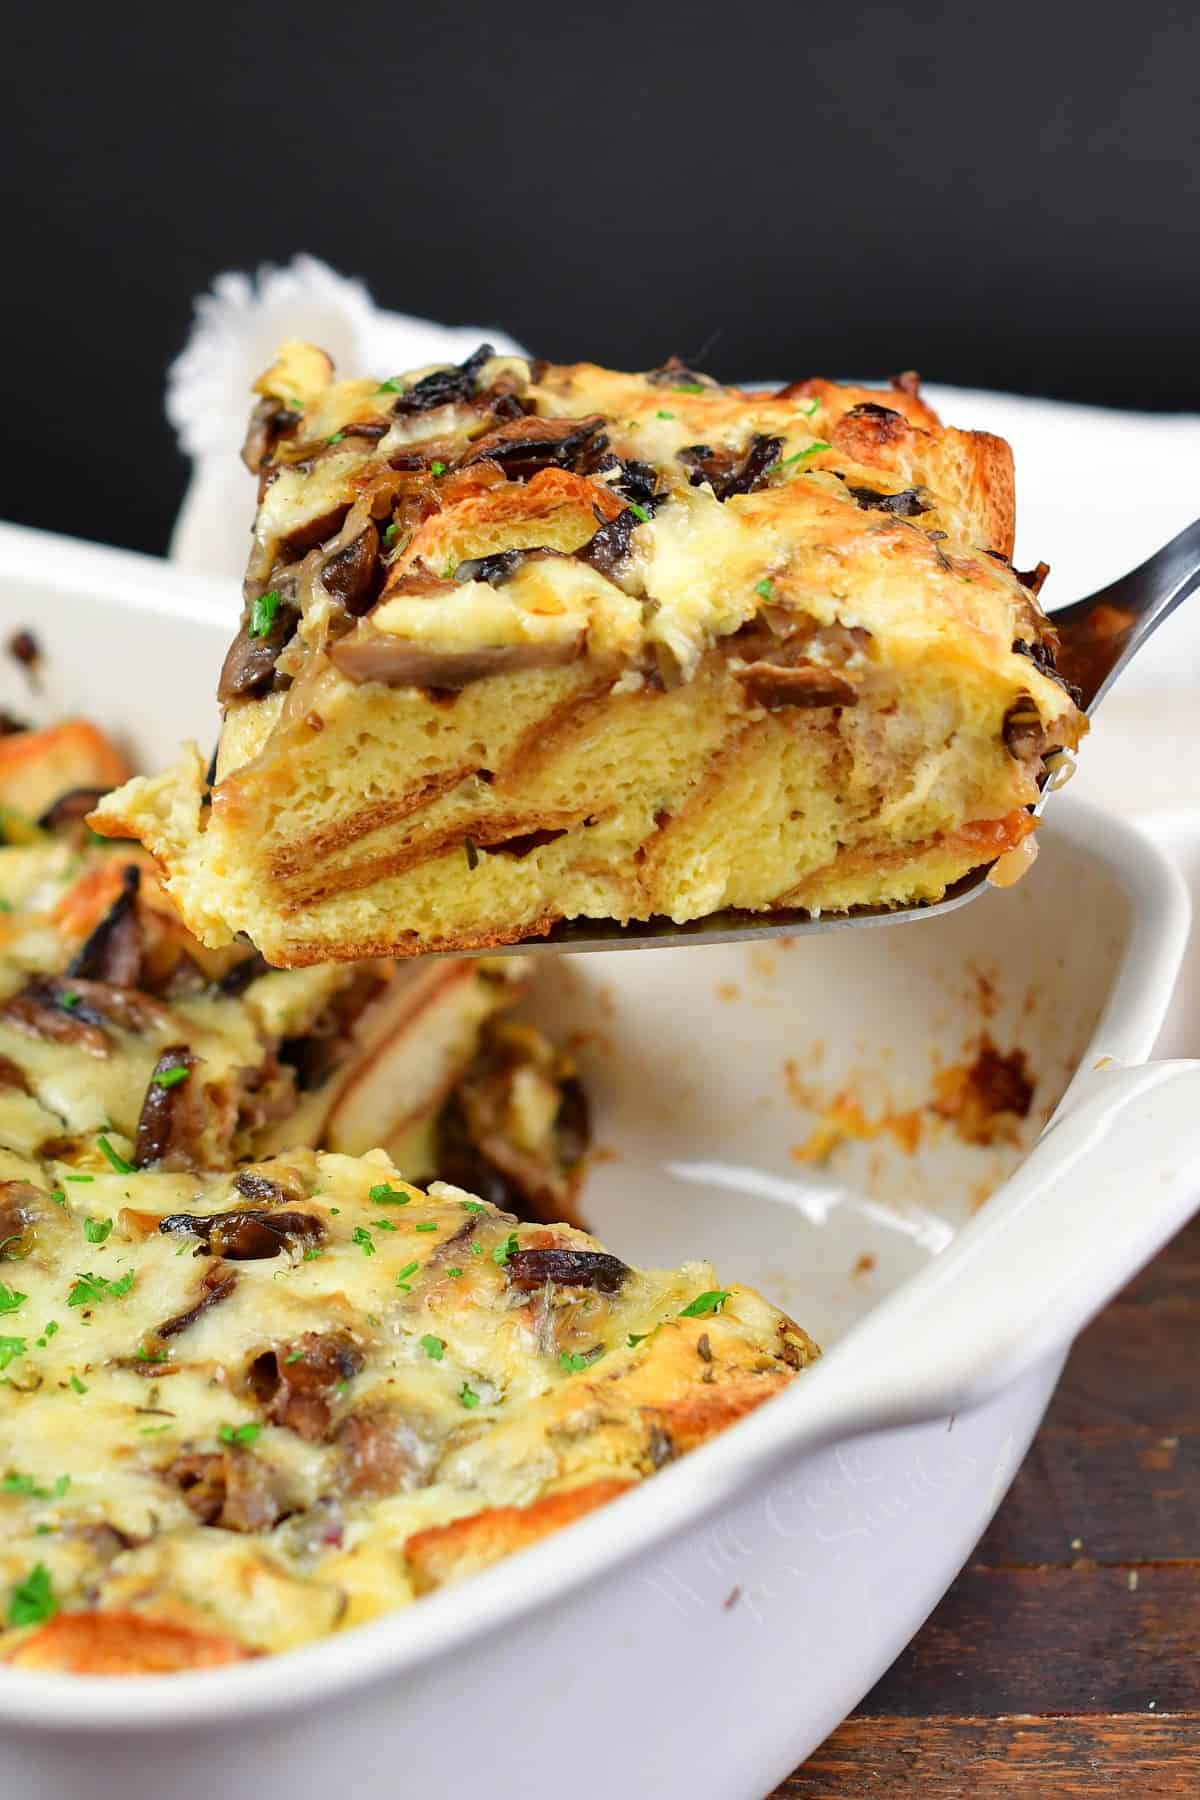 Mushroom Bread Pudding - Will Cook For Smiles